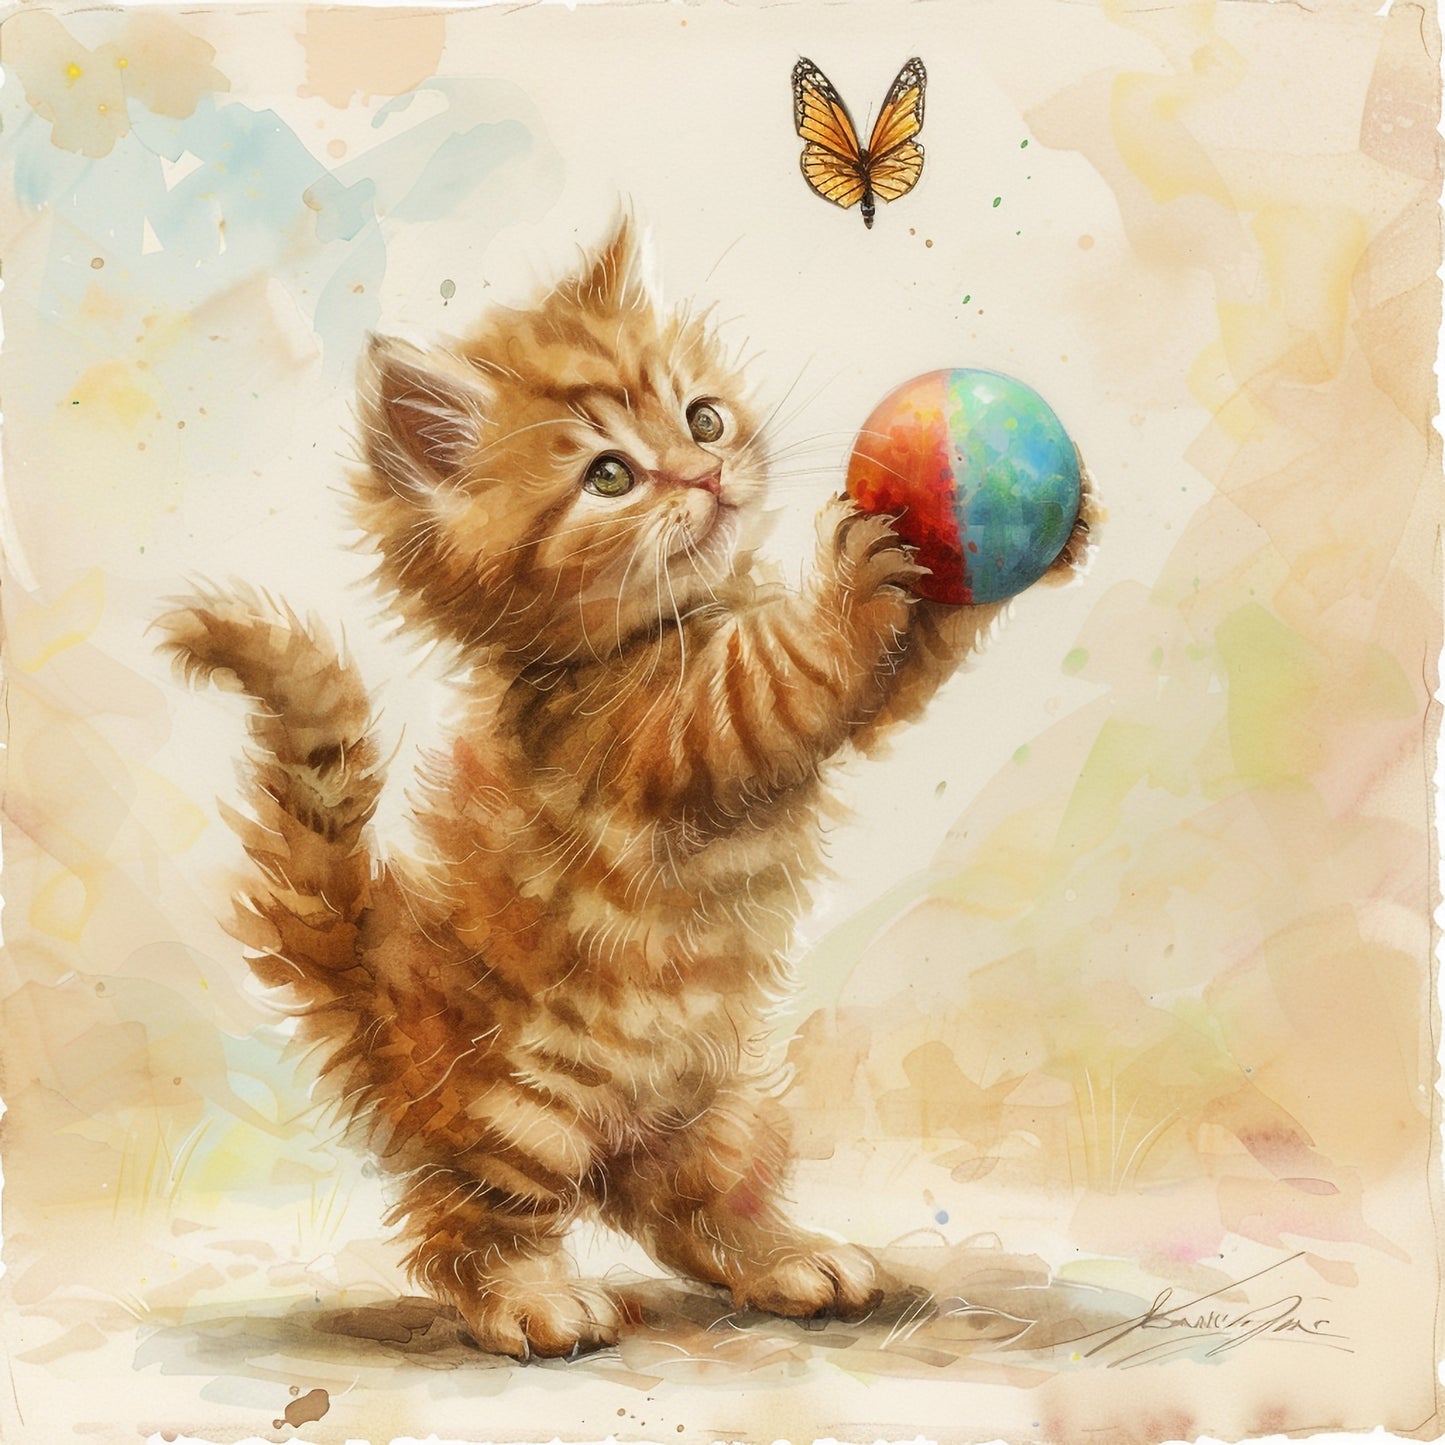 Cute Kitten Playing with Colorful Ball and Butterfly